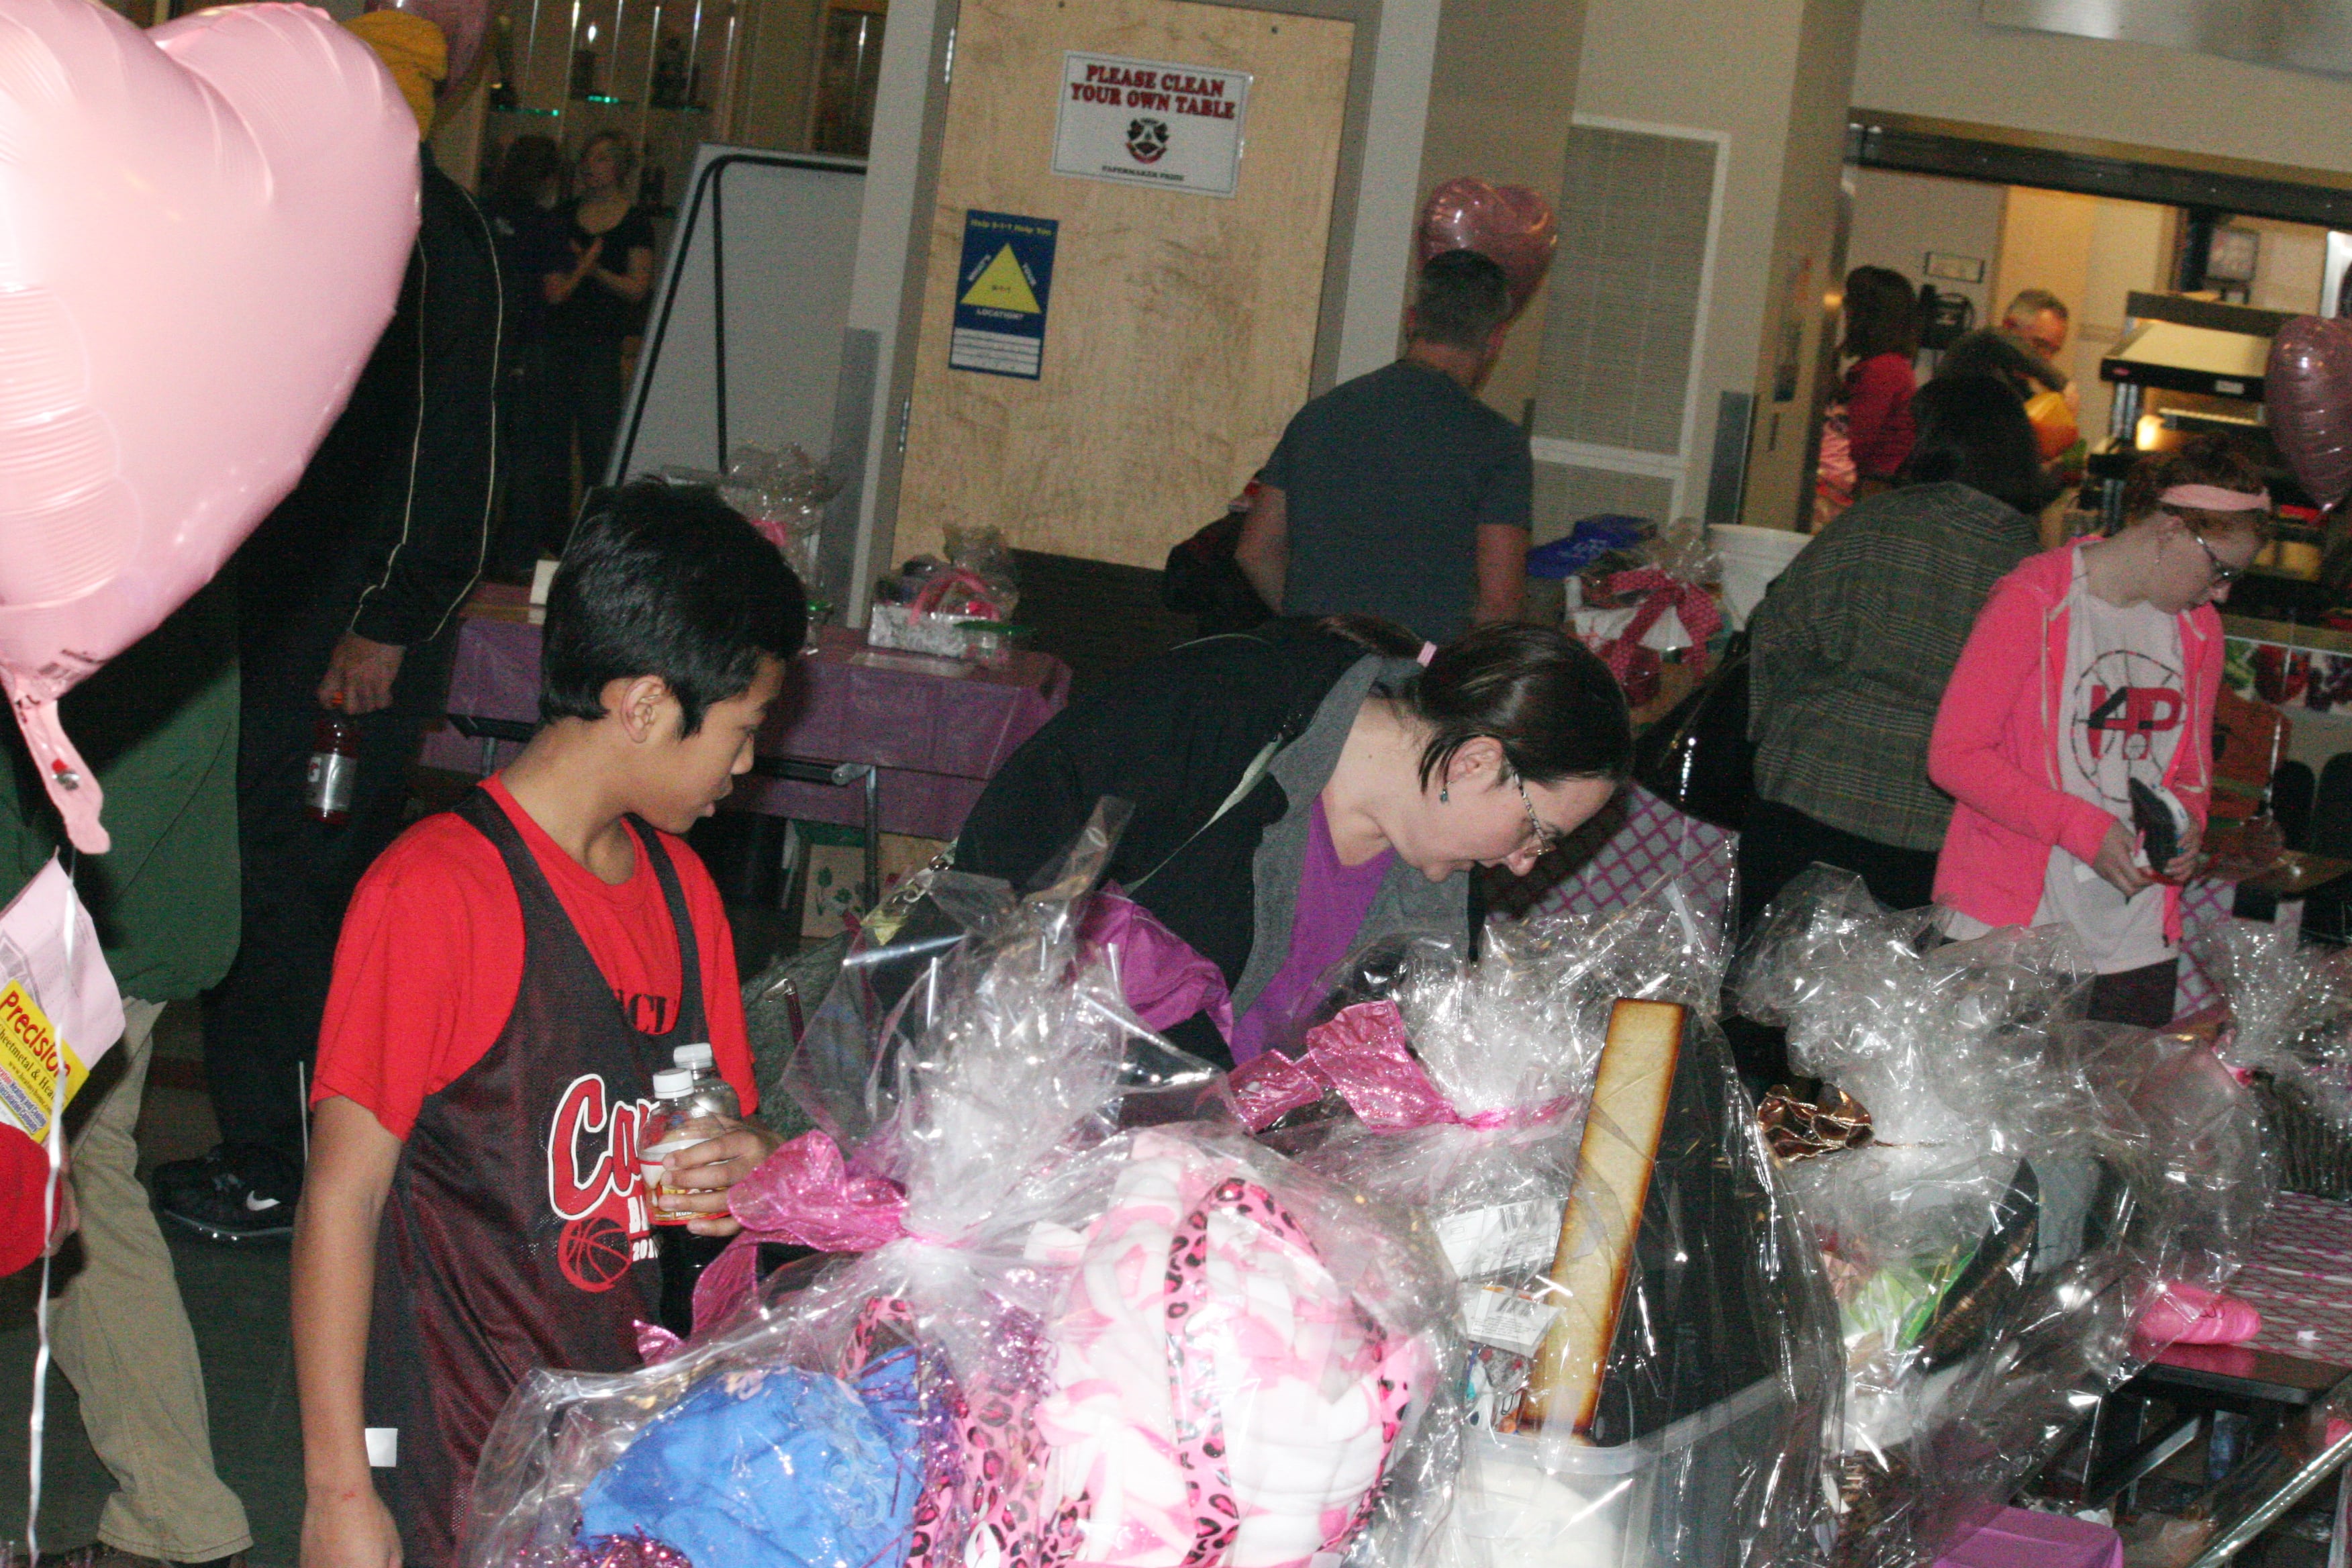 Fans enter a raffle to try and win a Hoops For Pink basket.